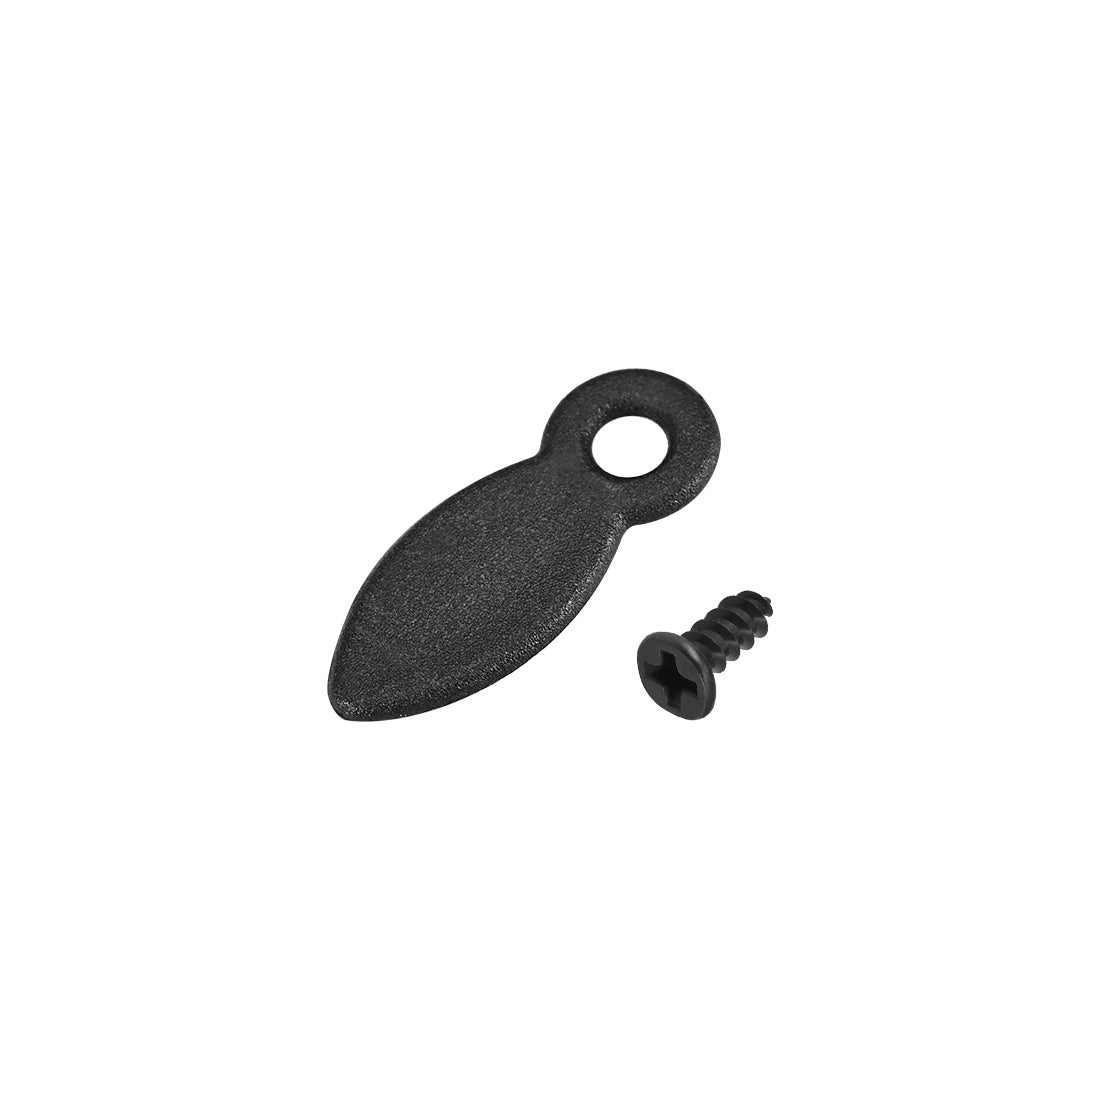 uxcell Uxcell Frame Turn Button, 3/4" Plastic Drop Shape with Screws for Hanging Pictures, 30 Pcs (Black)